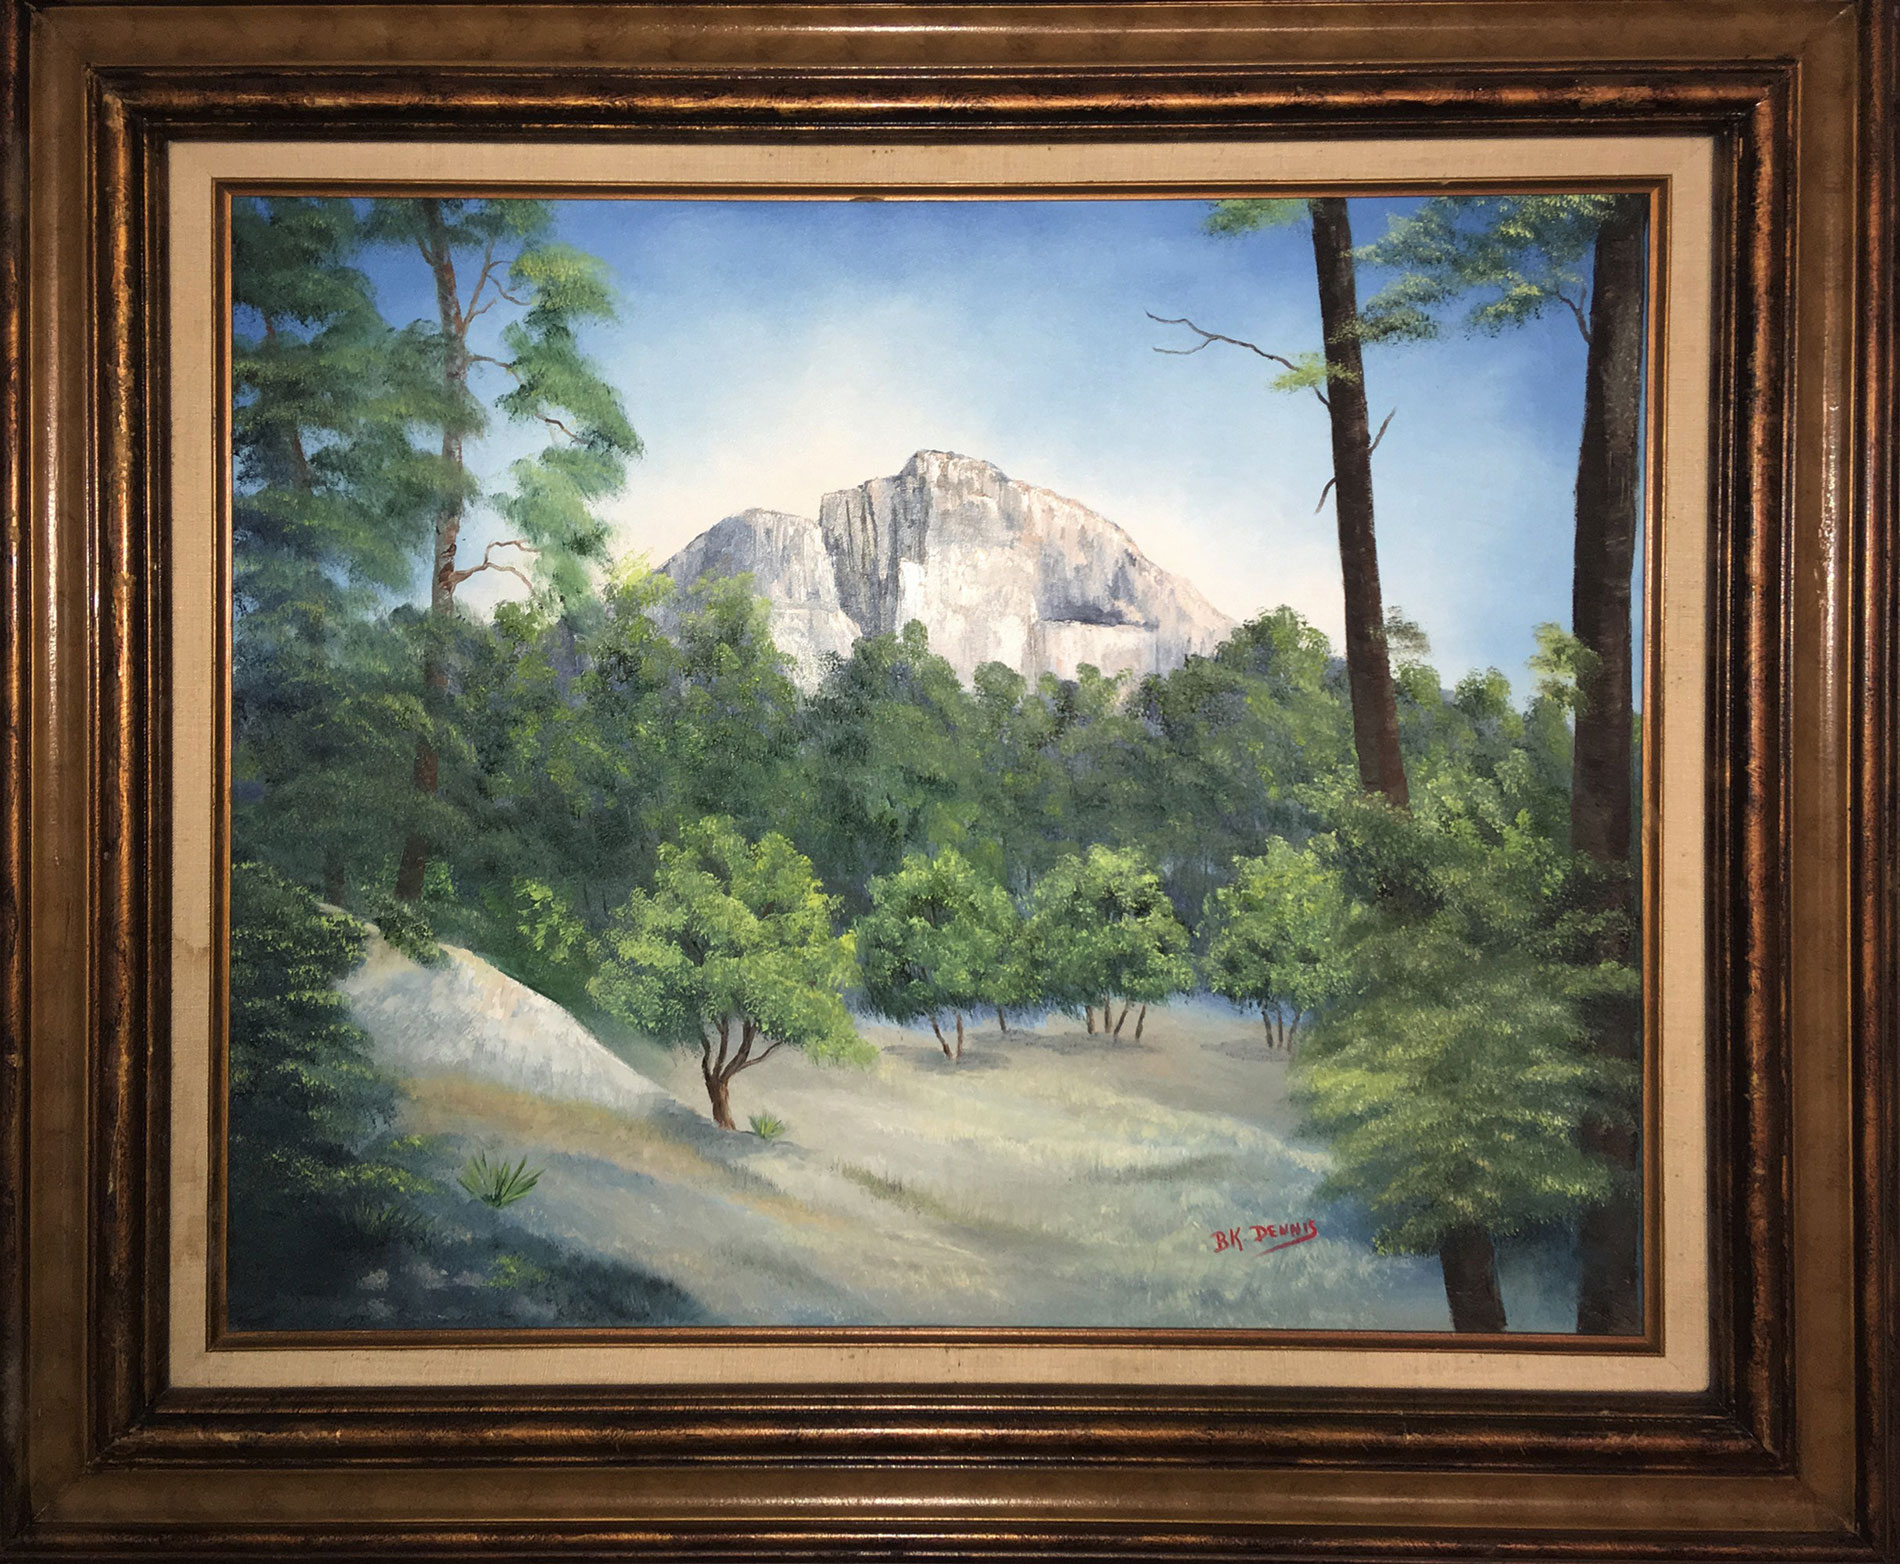 Oil painting of Emory Peak as seen from inside the Chisos Basin in Big Bend National Park. Painted by B.K. Dennis of Alpine, TX.